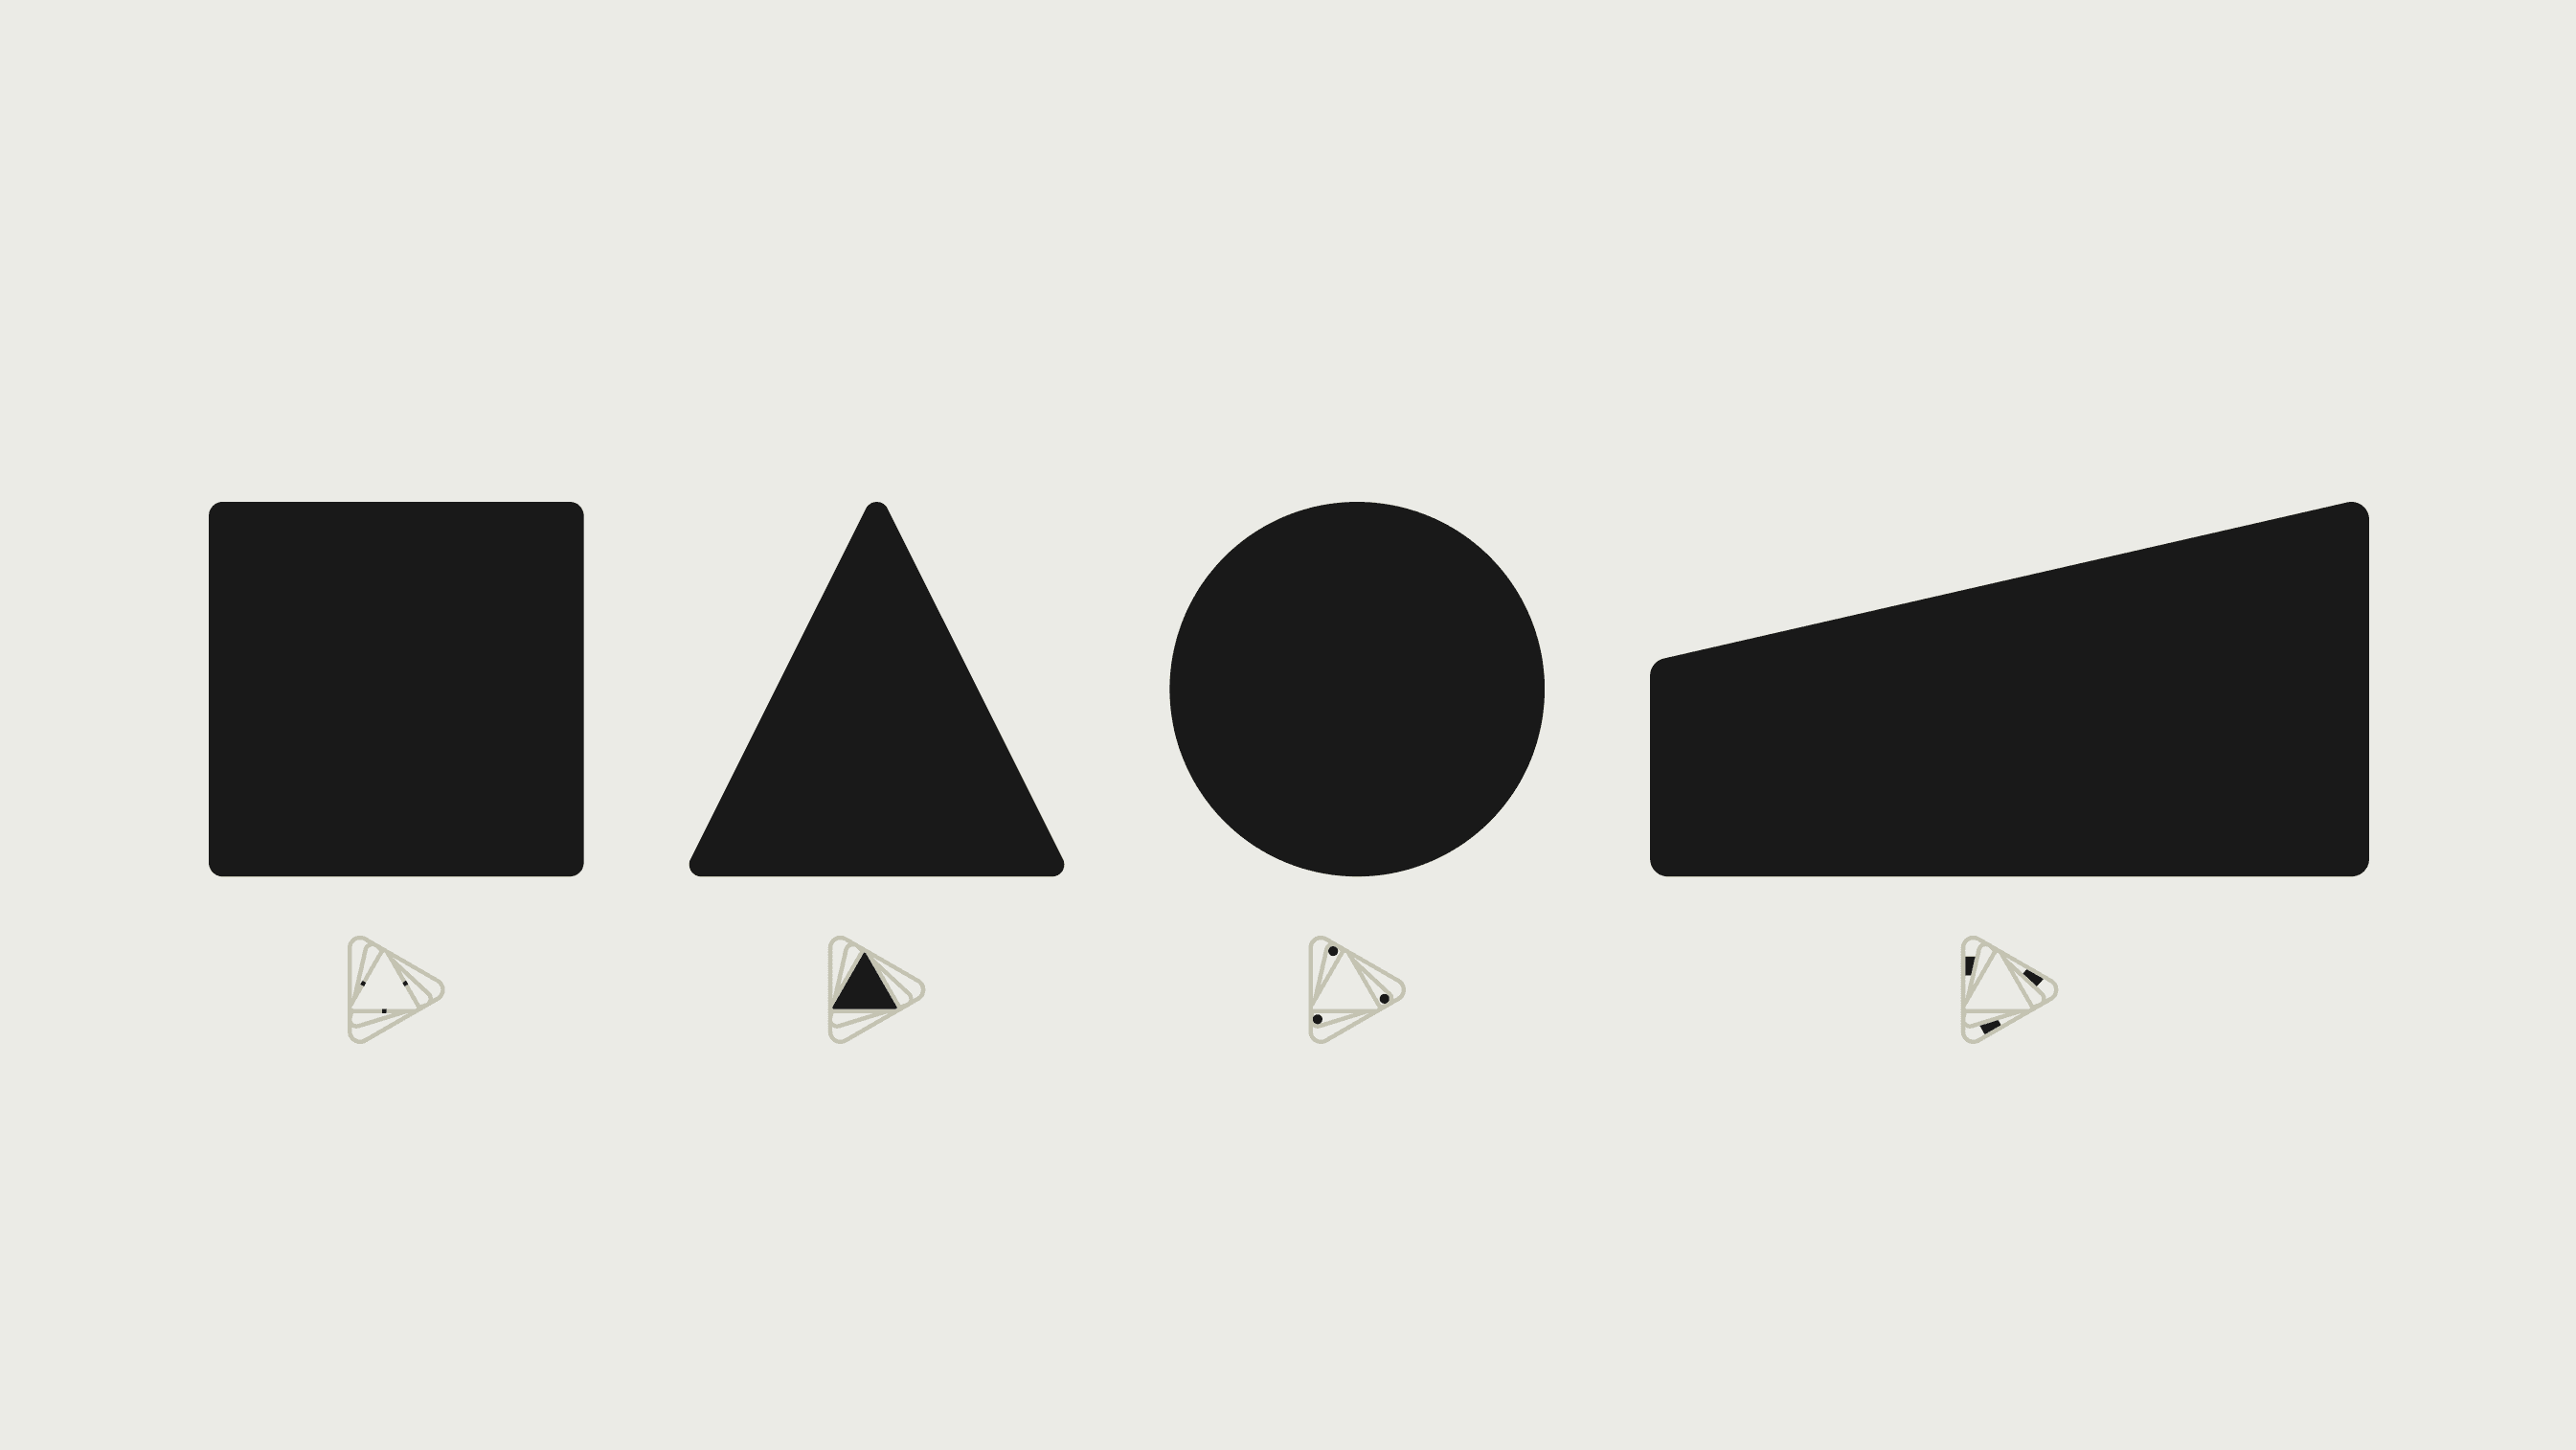 Four shapes in our graphic system